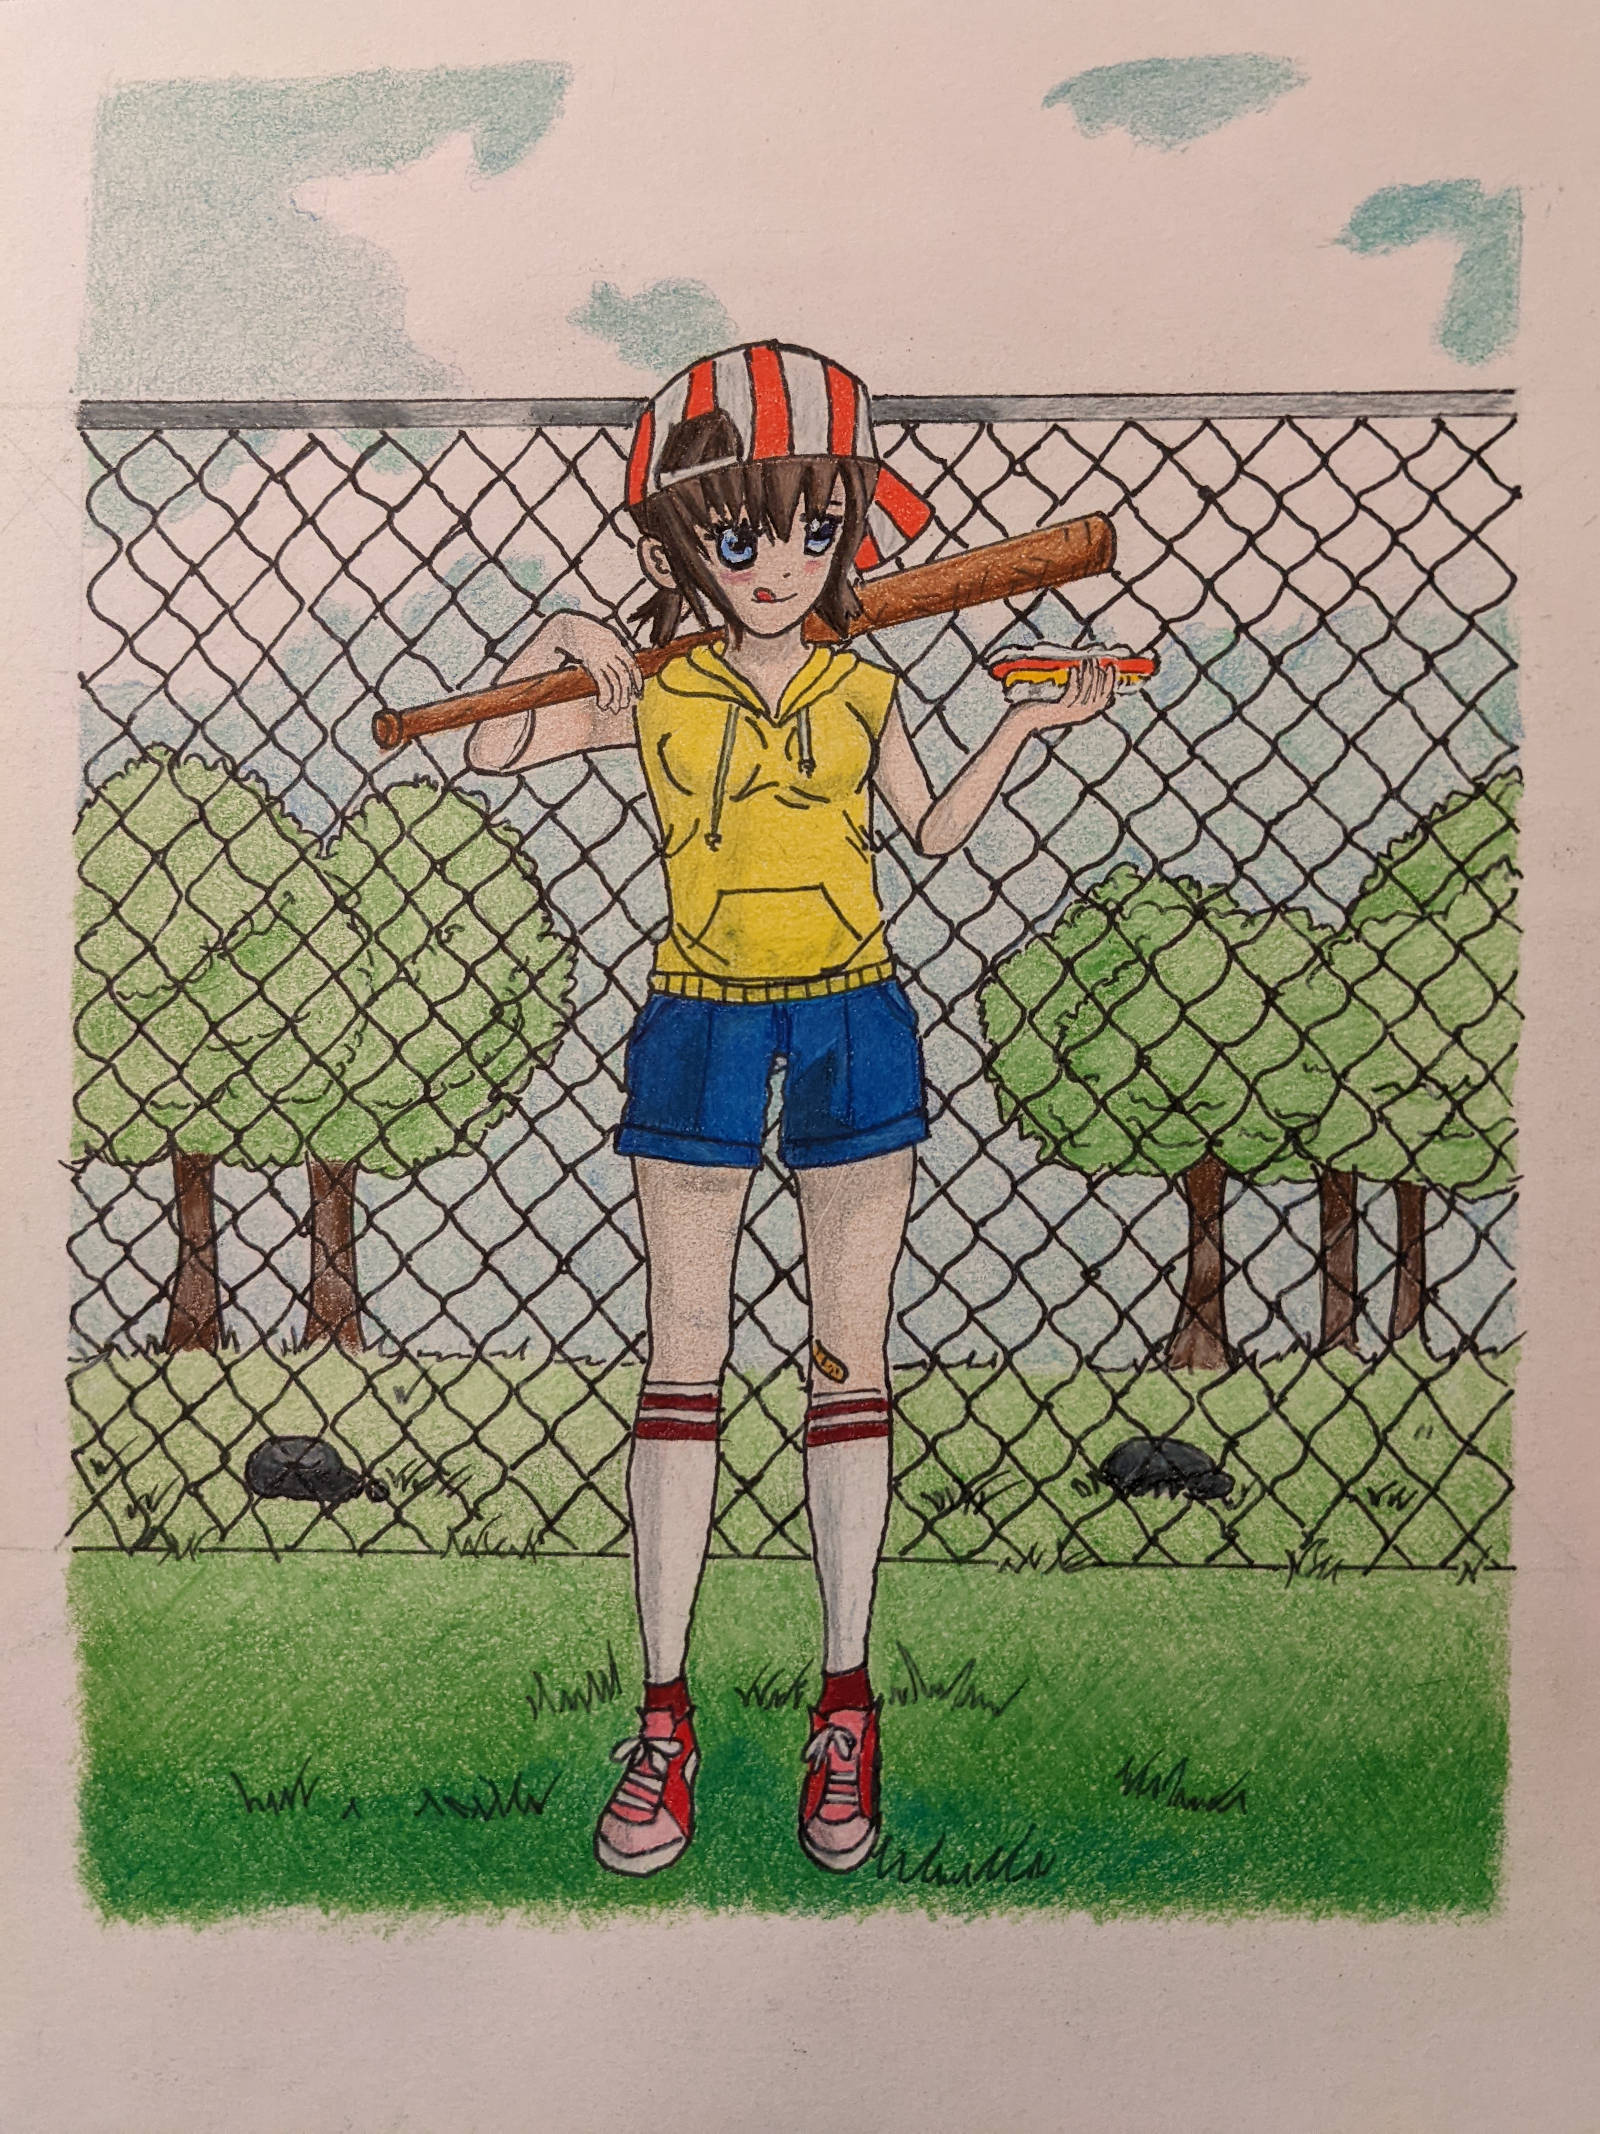 Girl holding a softball bat over her shoulder. In her left hand, holding a hotdog. She is standing in front of a chain-linked fence with trees in the background. Almost fully colored.